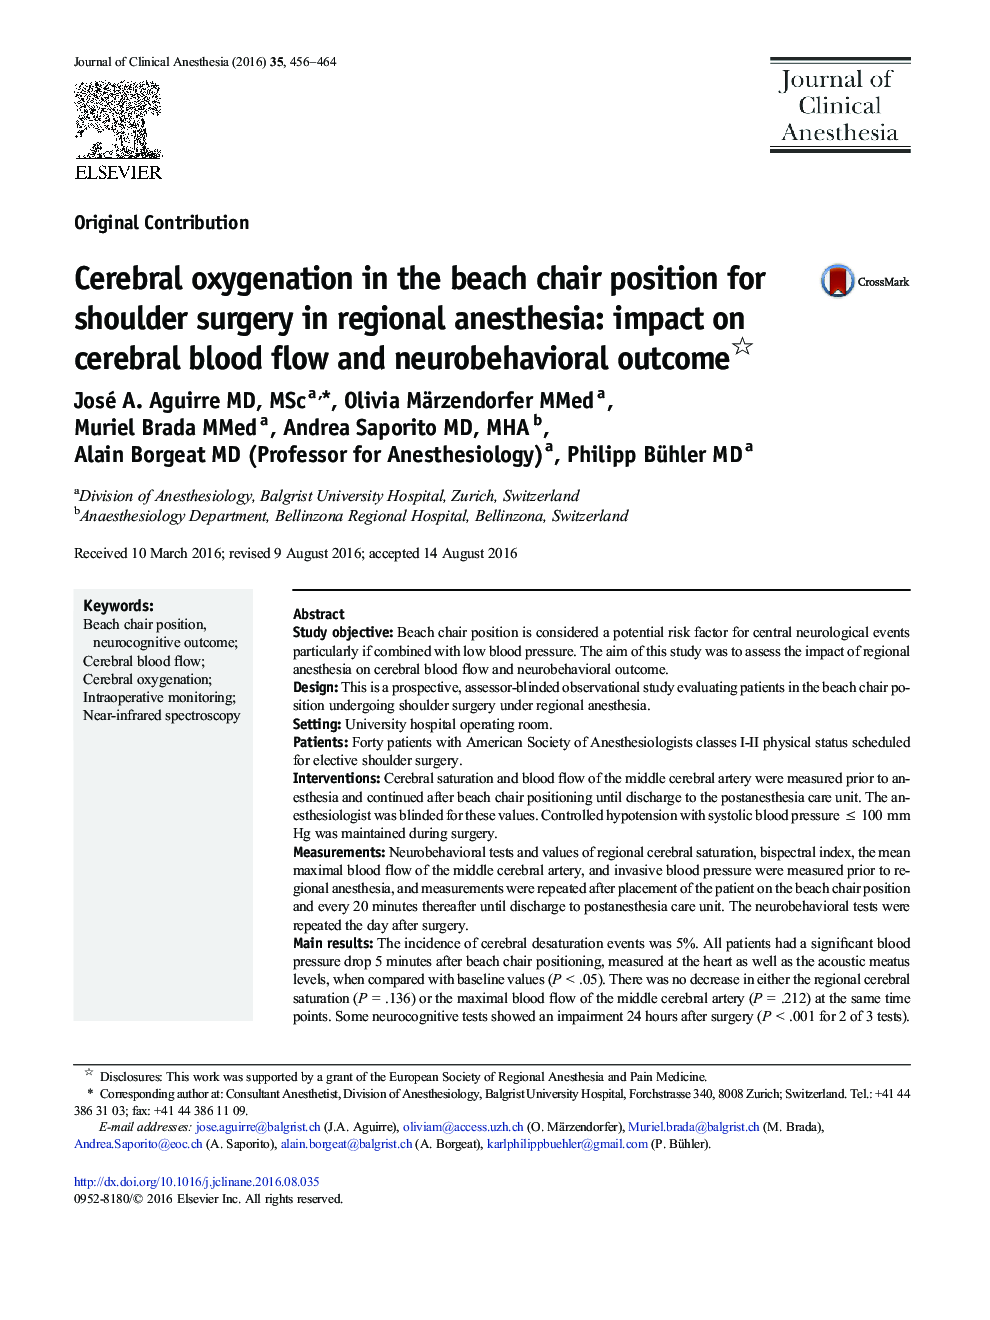 Cerebral oxygenation in the beach chair position for shoulder surgery in regional anesthesia: impact on cerebral blood flow and neurobehavioral outcome